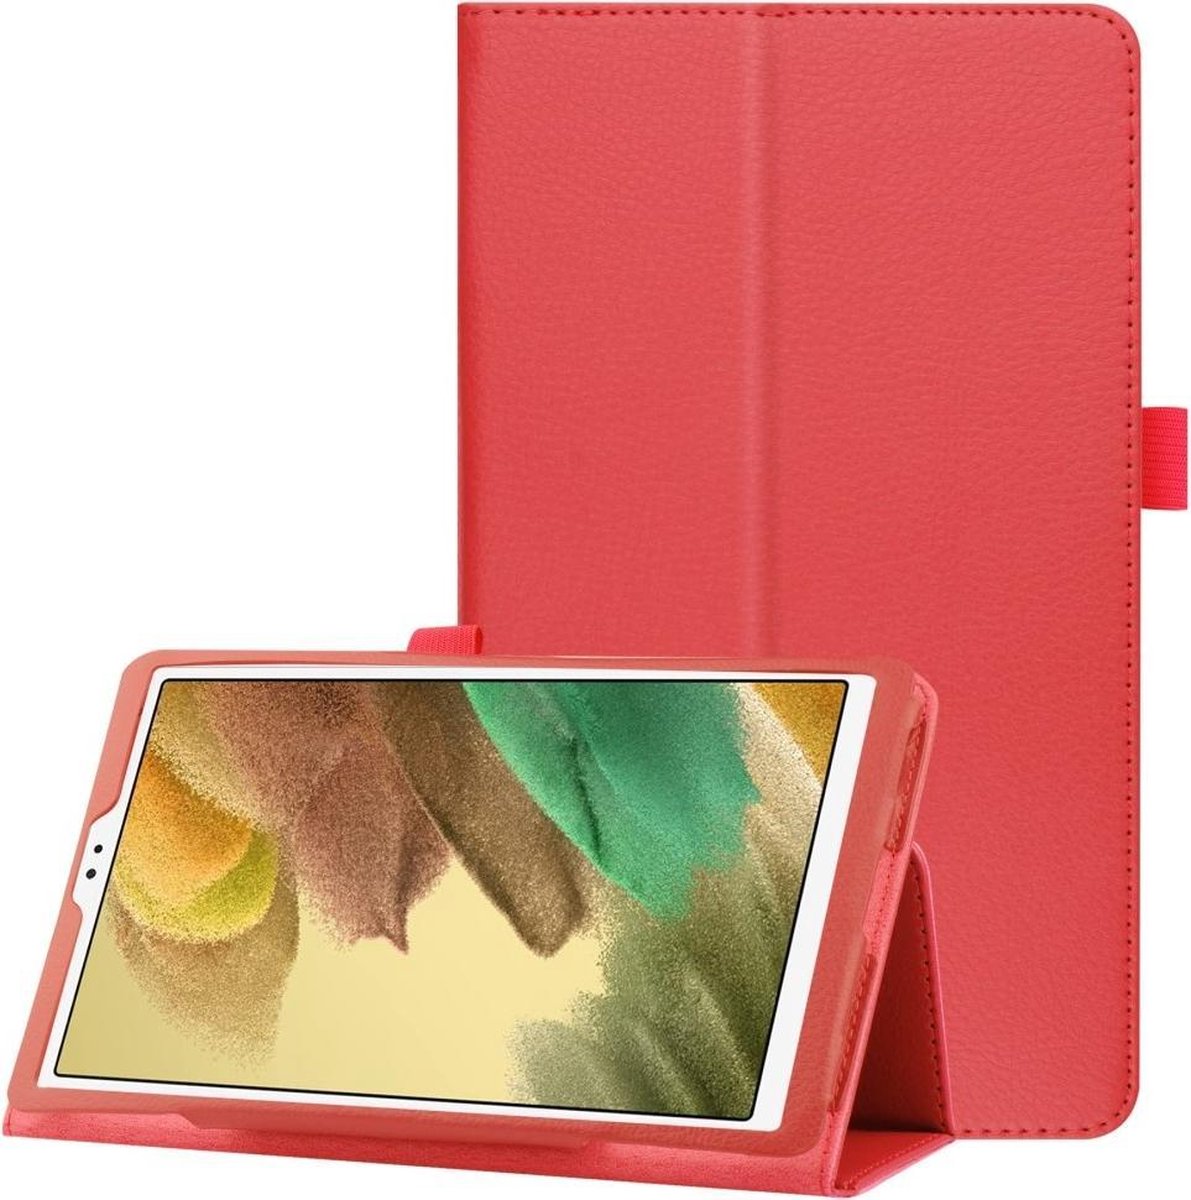 Lunso - Stand flip sleepcover hoes - Geschikt voor Samsung Galaxy Tab A7 Lite - Rood